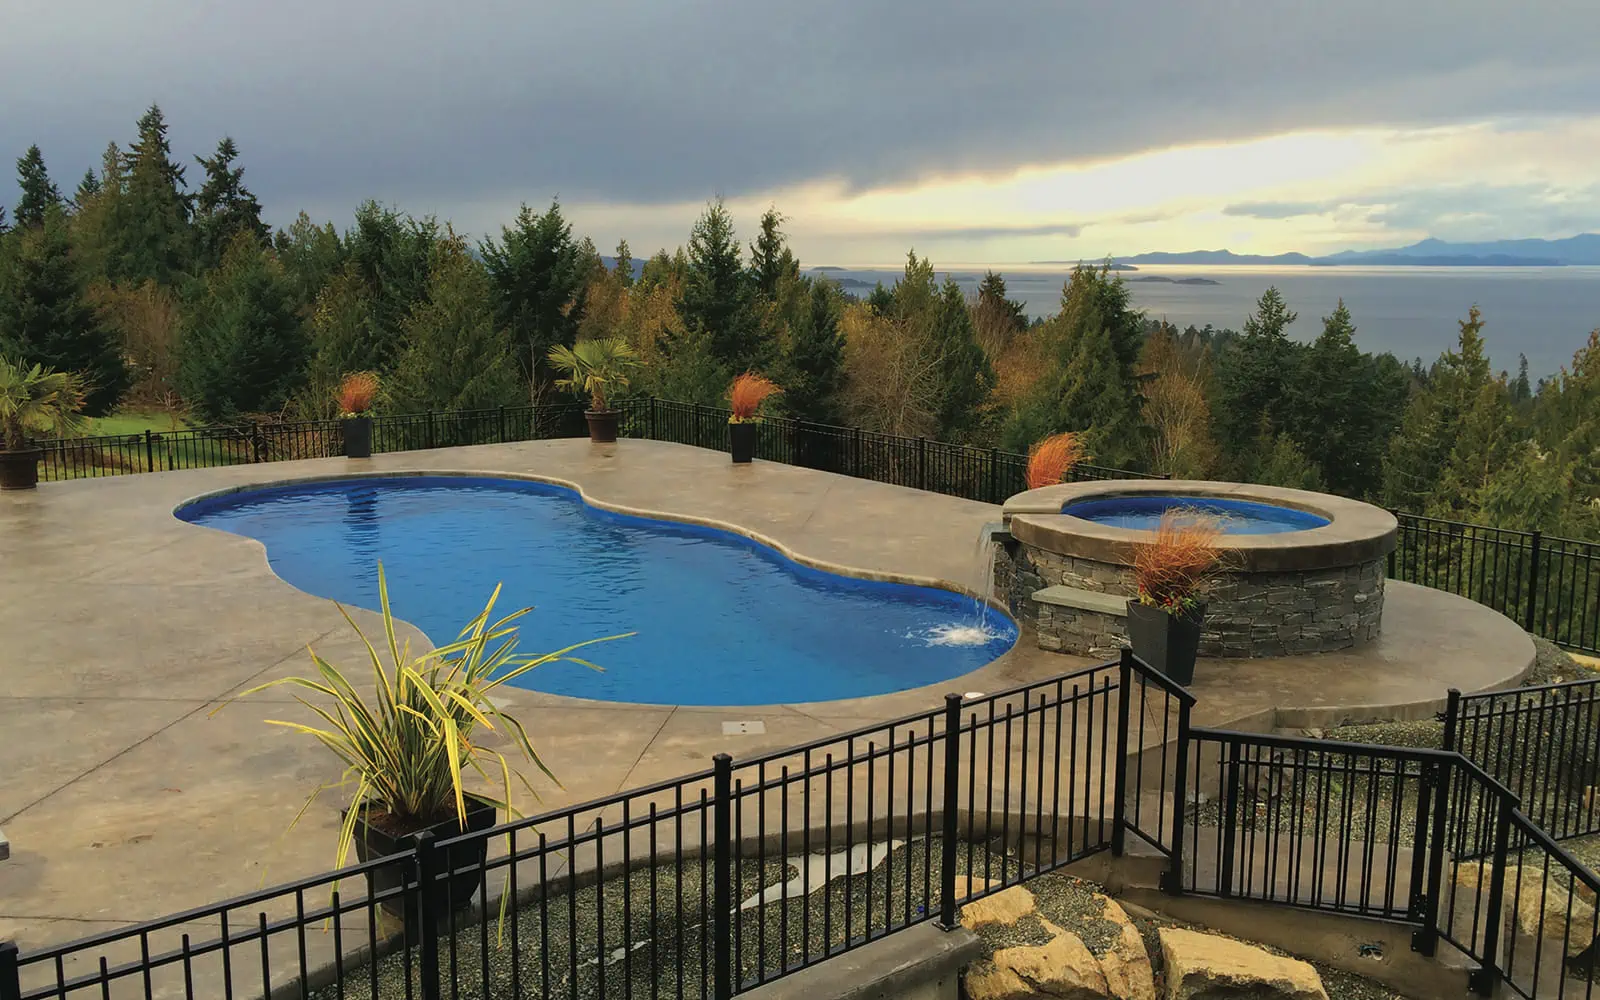 Blue Orca Pools is a proud dealer and supplier of quality fiberglass pools in Vancouver and surrounding areas